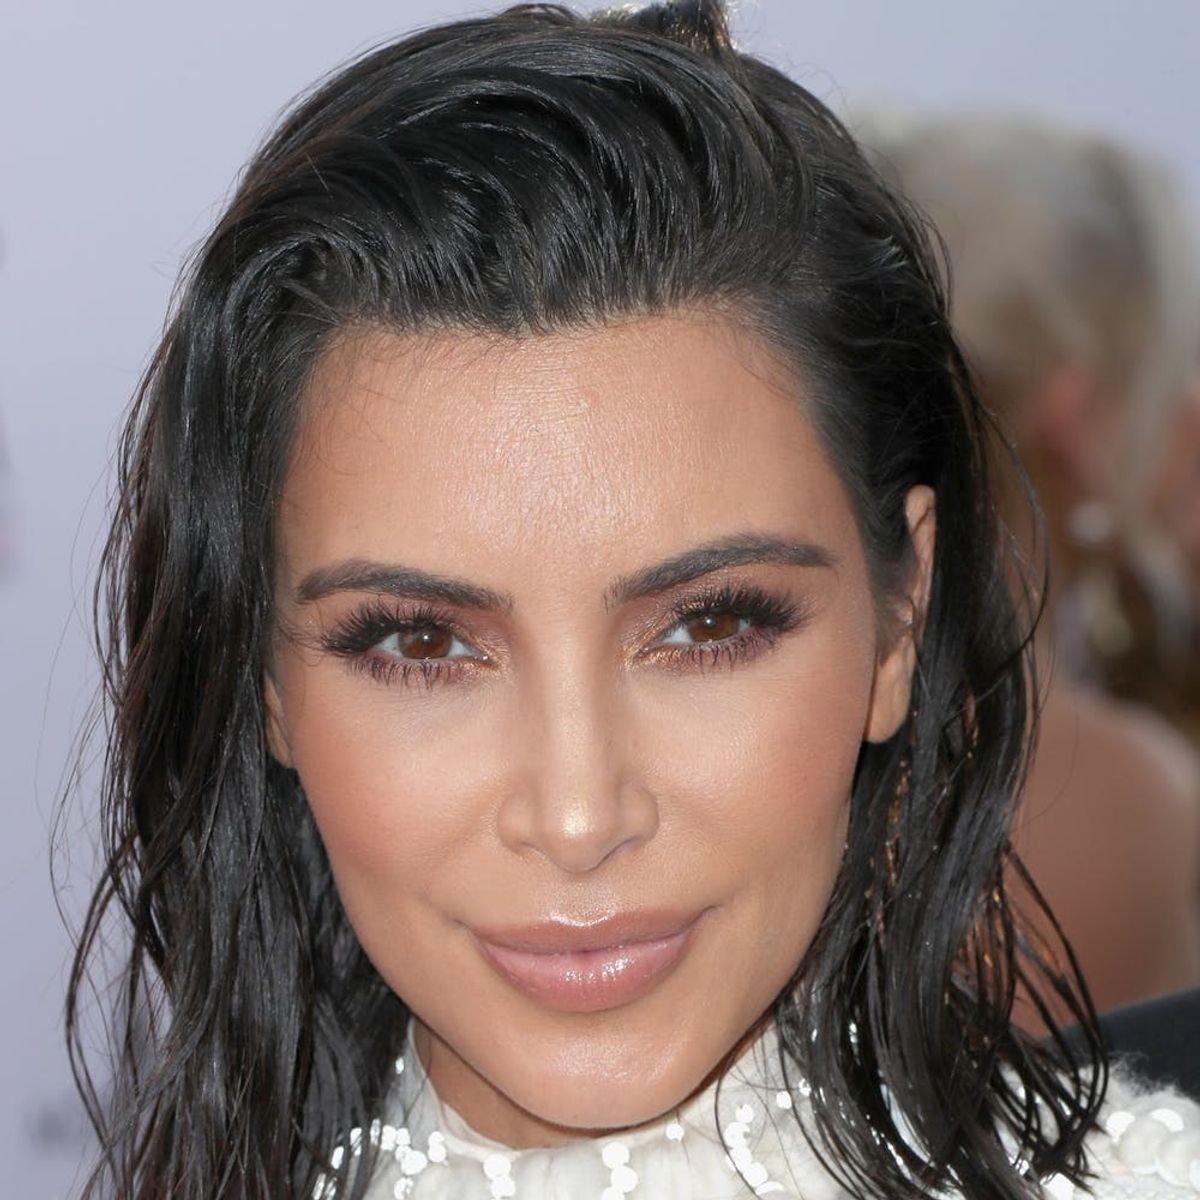 Here’s How to Get Your Hands on Kim Kardashian’s Latest Makeup Obsession